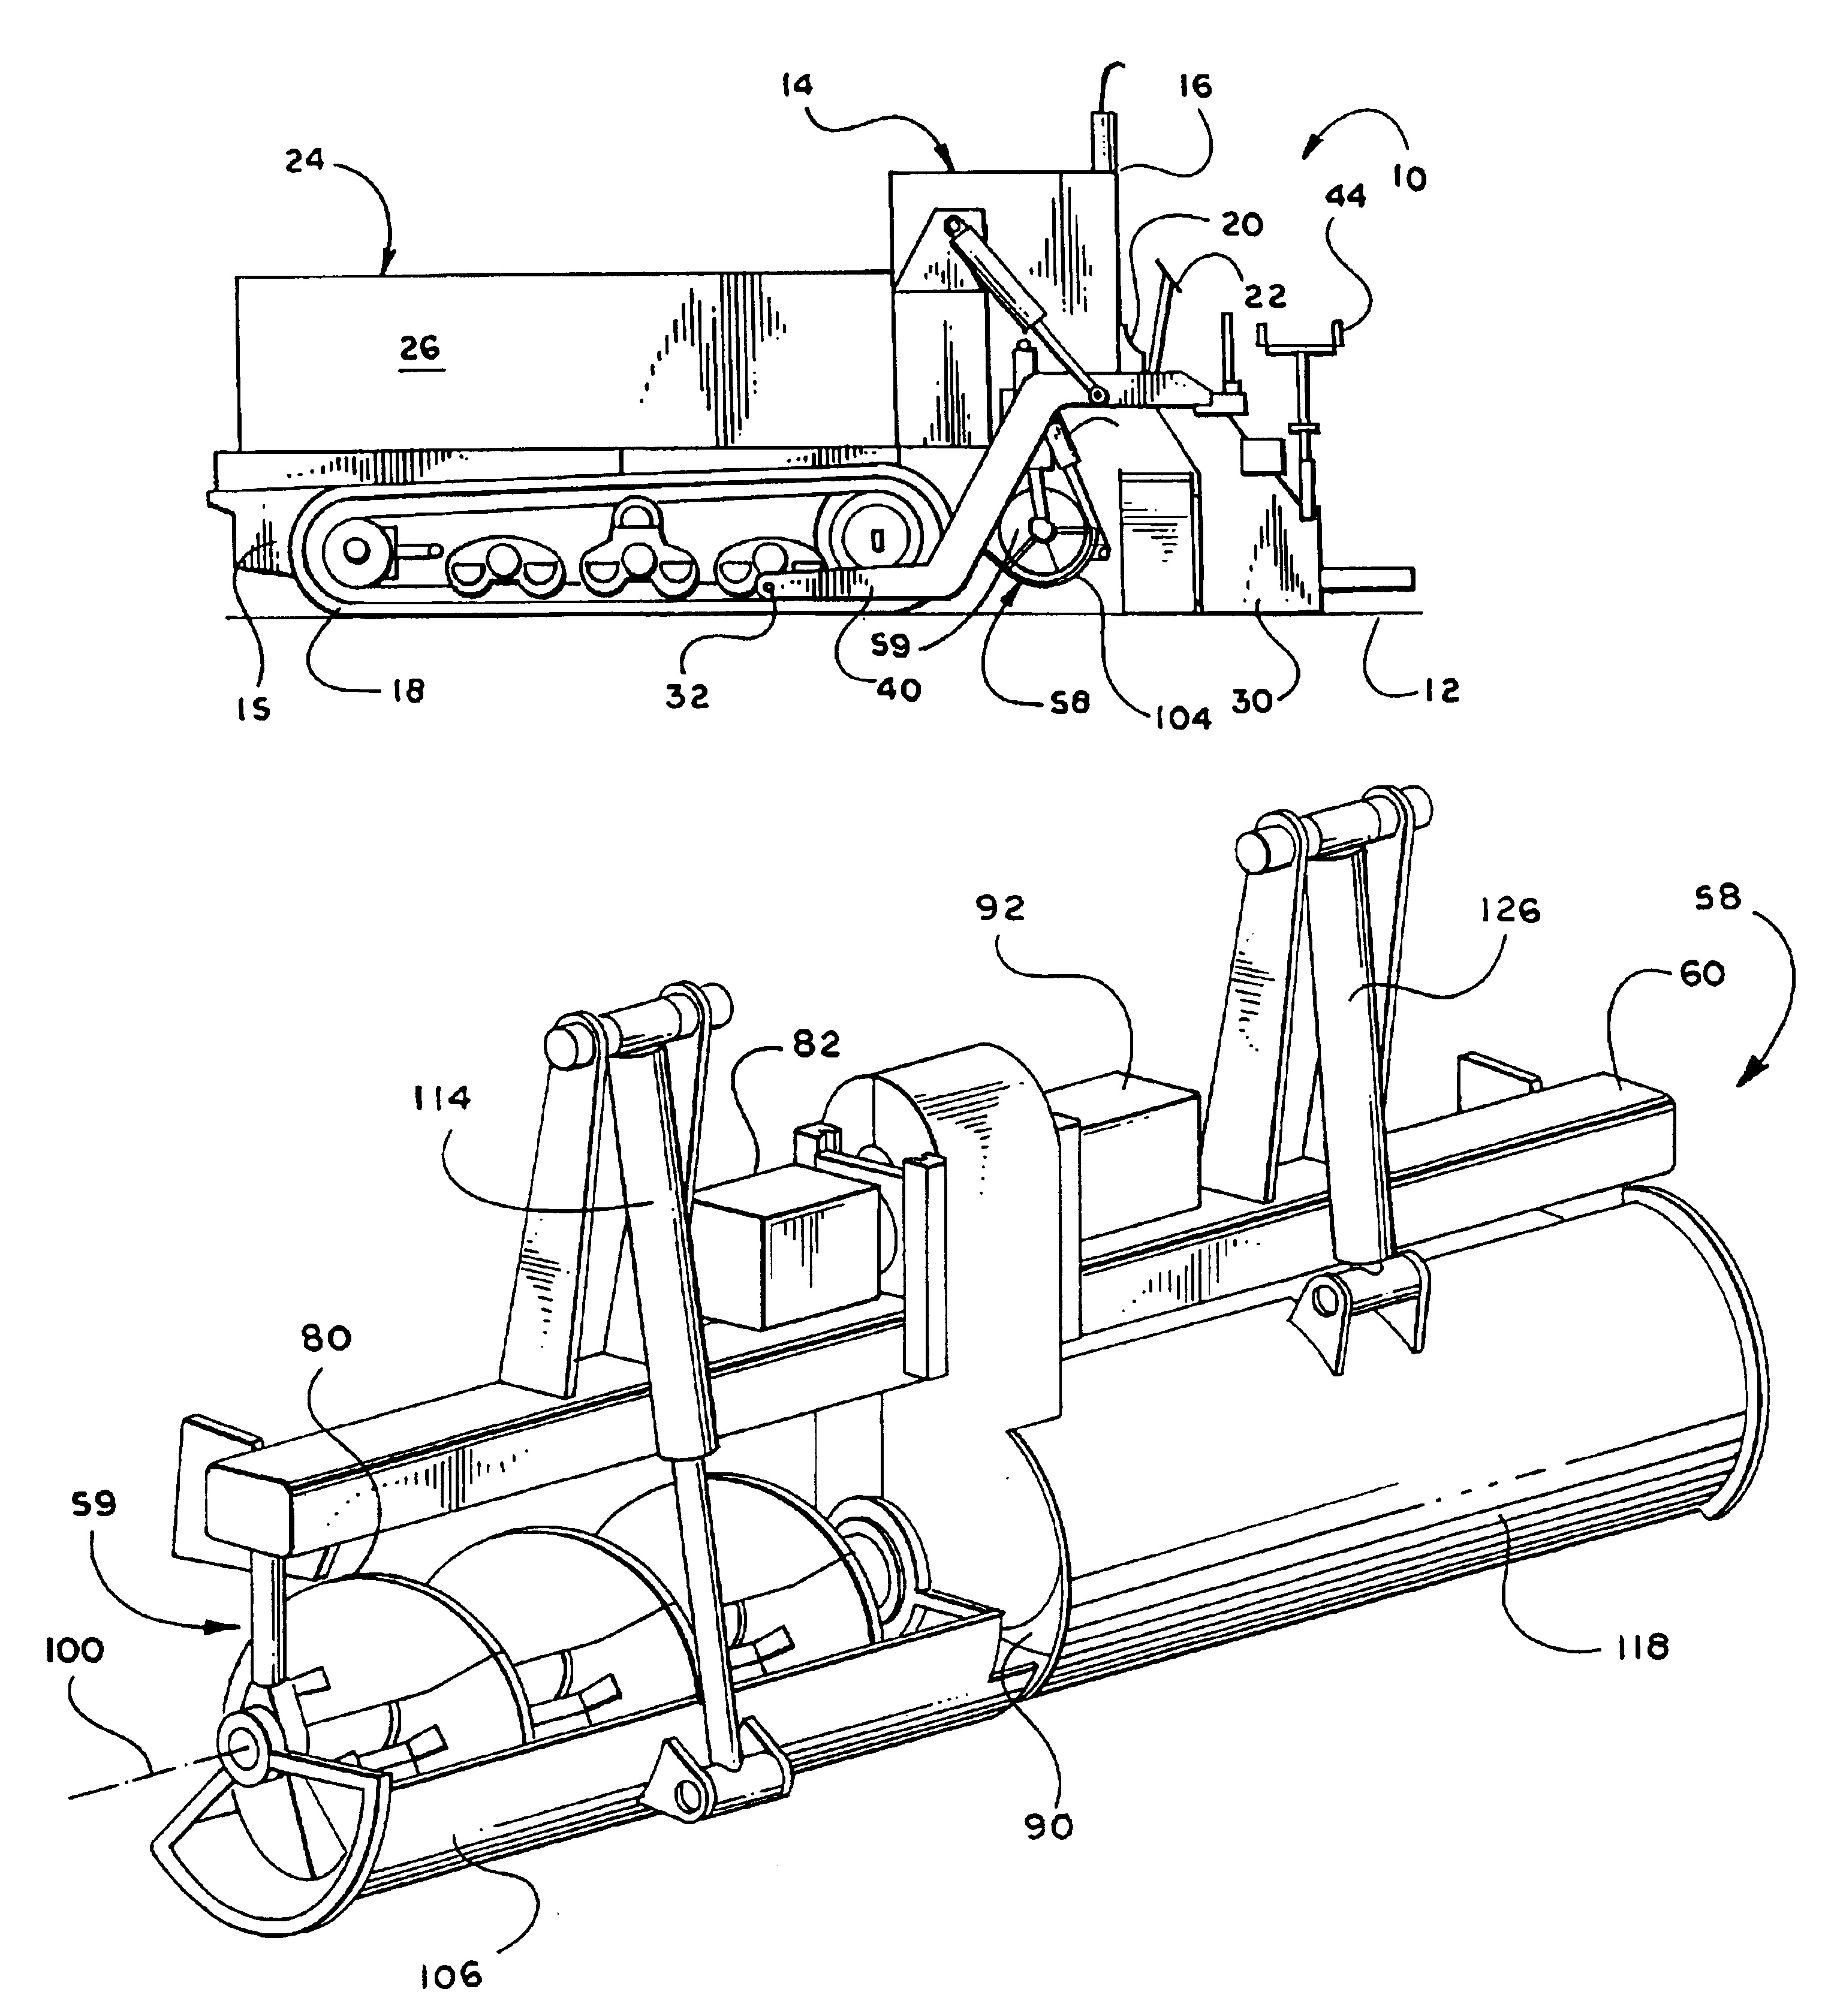 Cut off and strike off mechanism for a paving machine